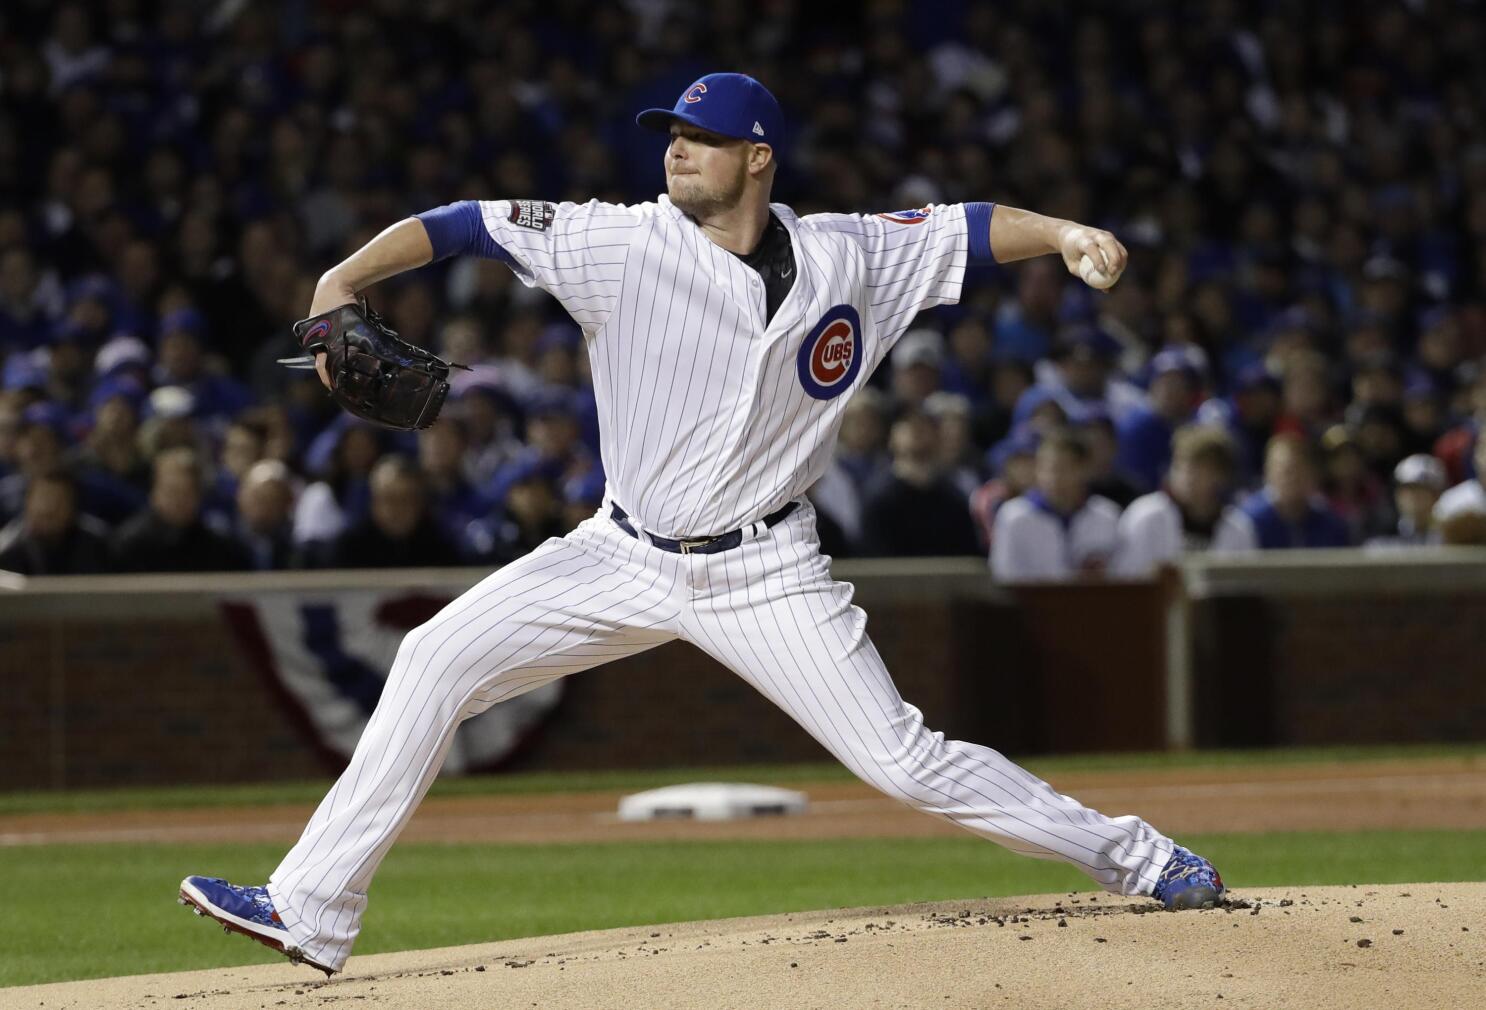 After long road, Jon Lester has moment to savor – Boston Herald